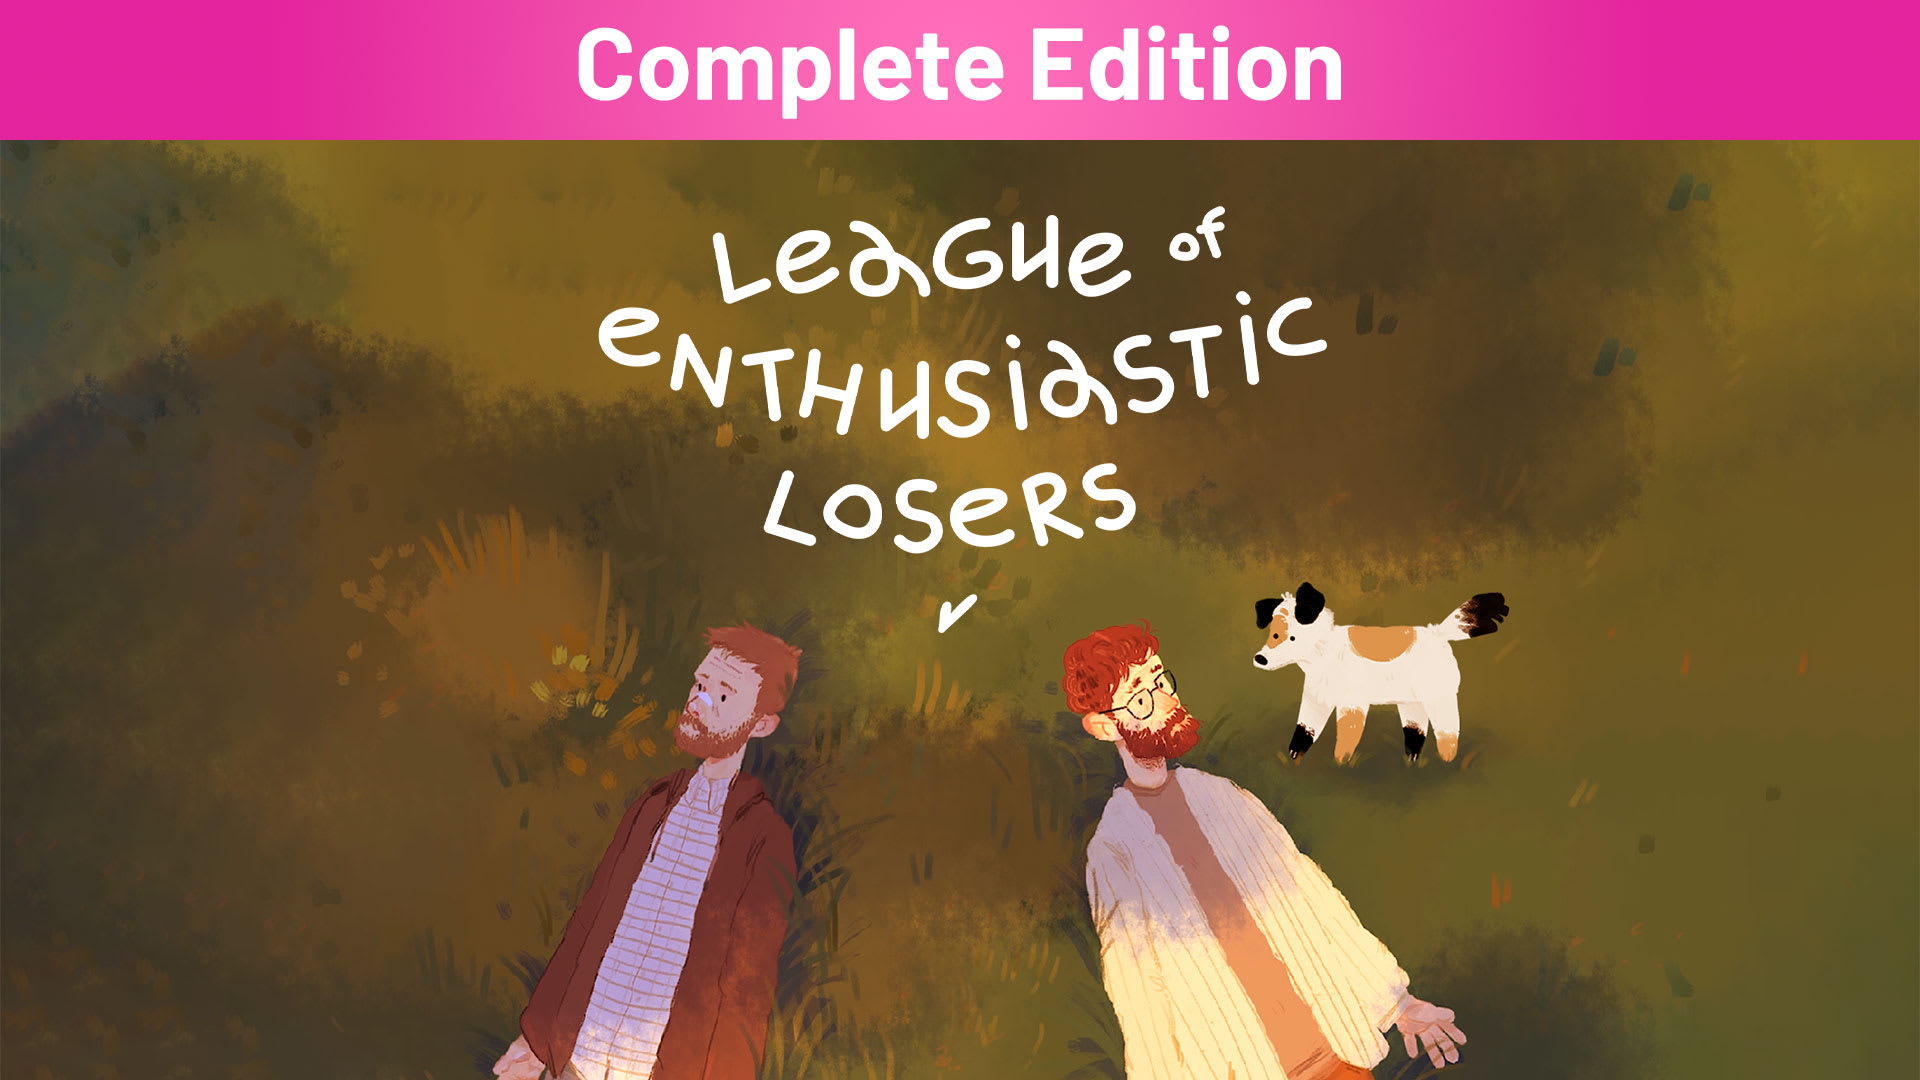 League of Enthusiastic Losers Complete Edition